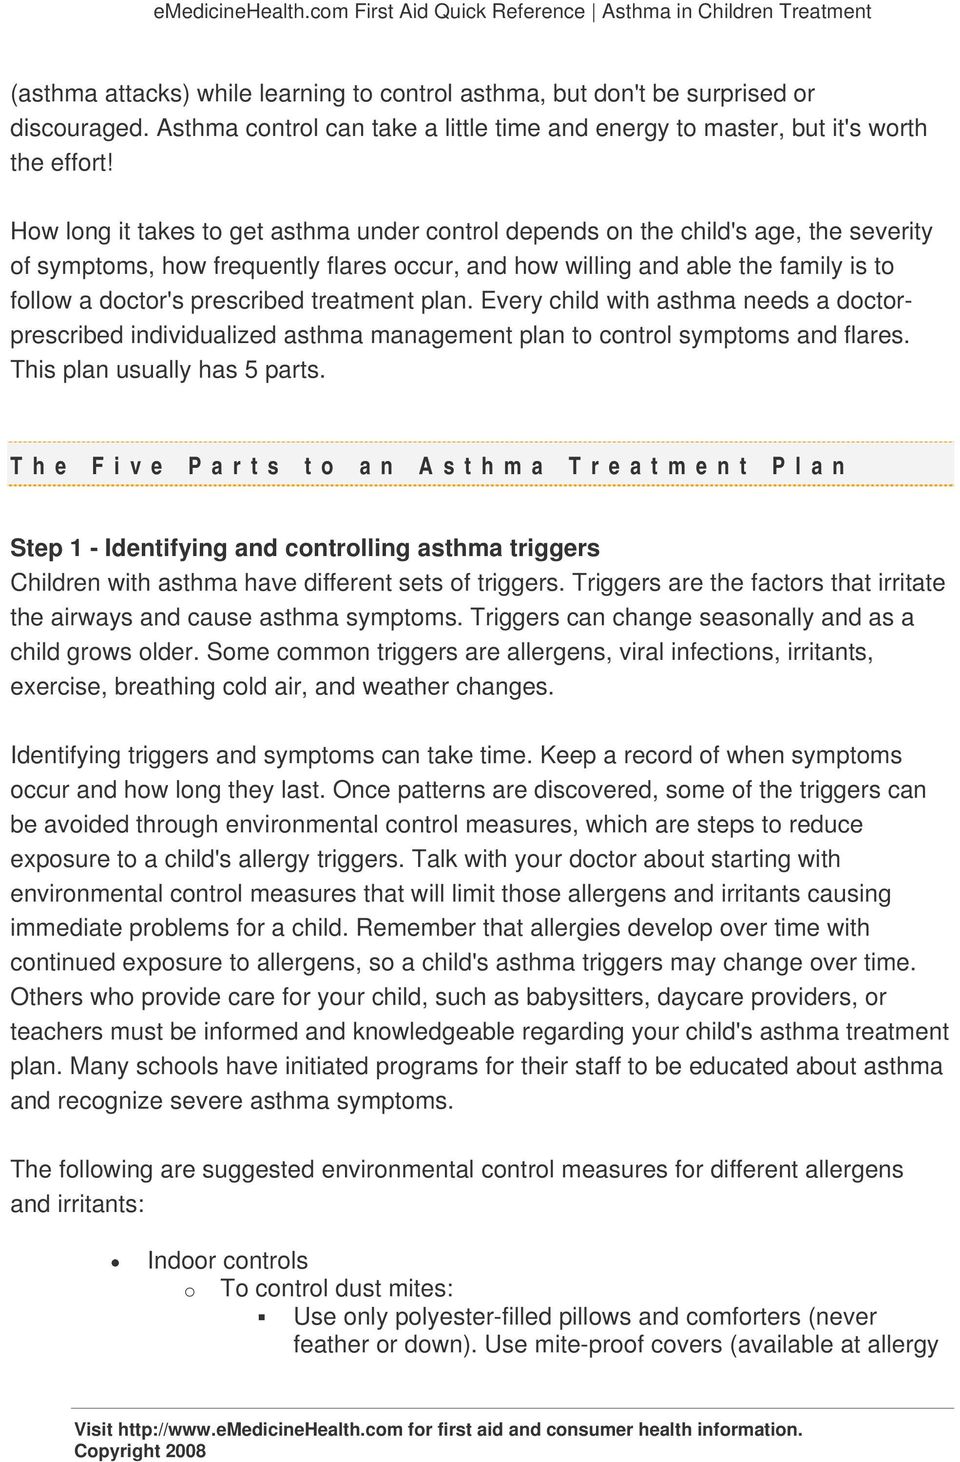 treatment plan. Every child with asthma needs a doctorprescribed individualized asthma management plan to control symptoms and flares. This plan usually has 5 parts.